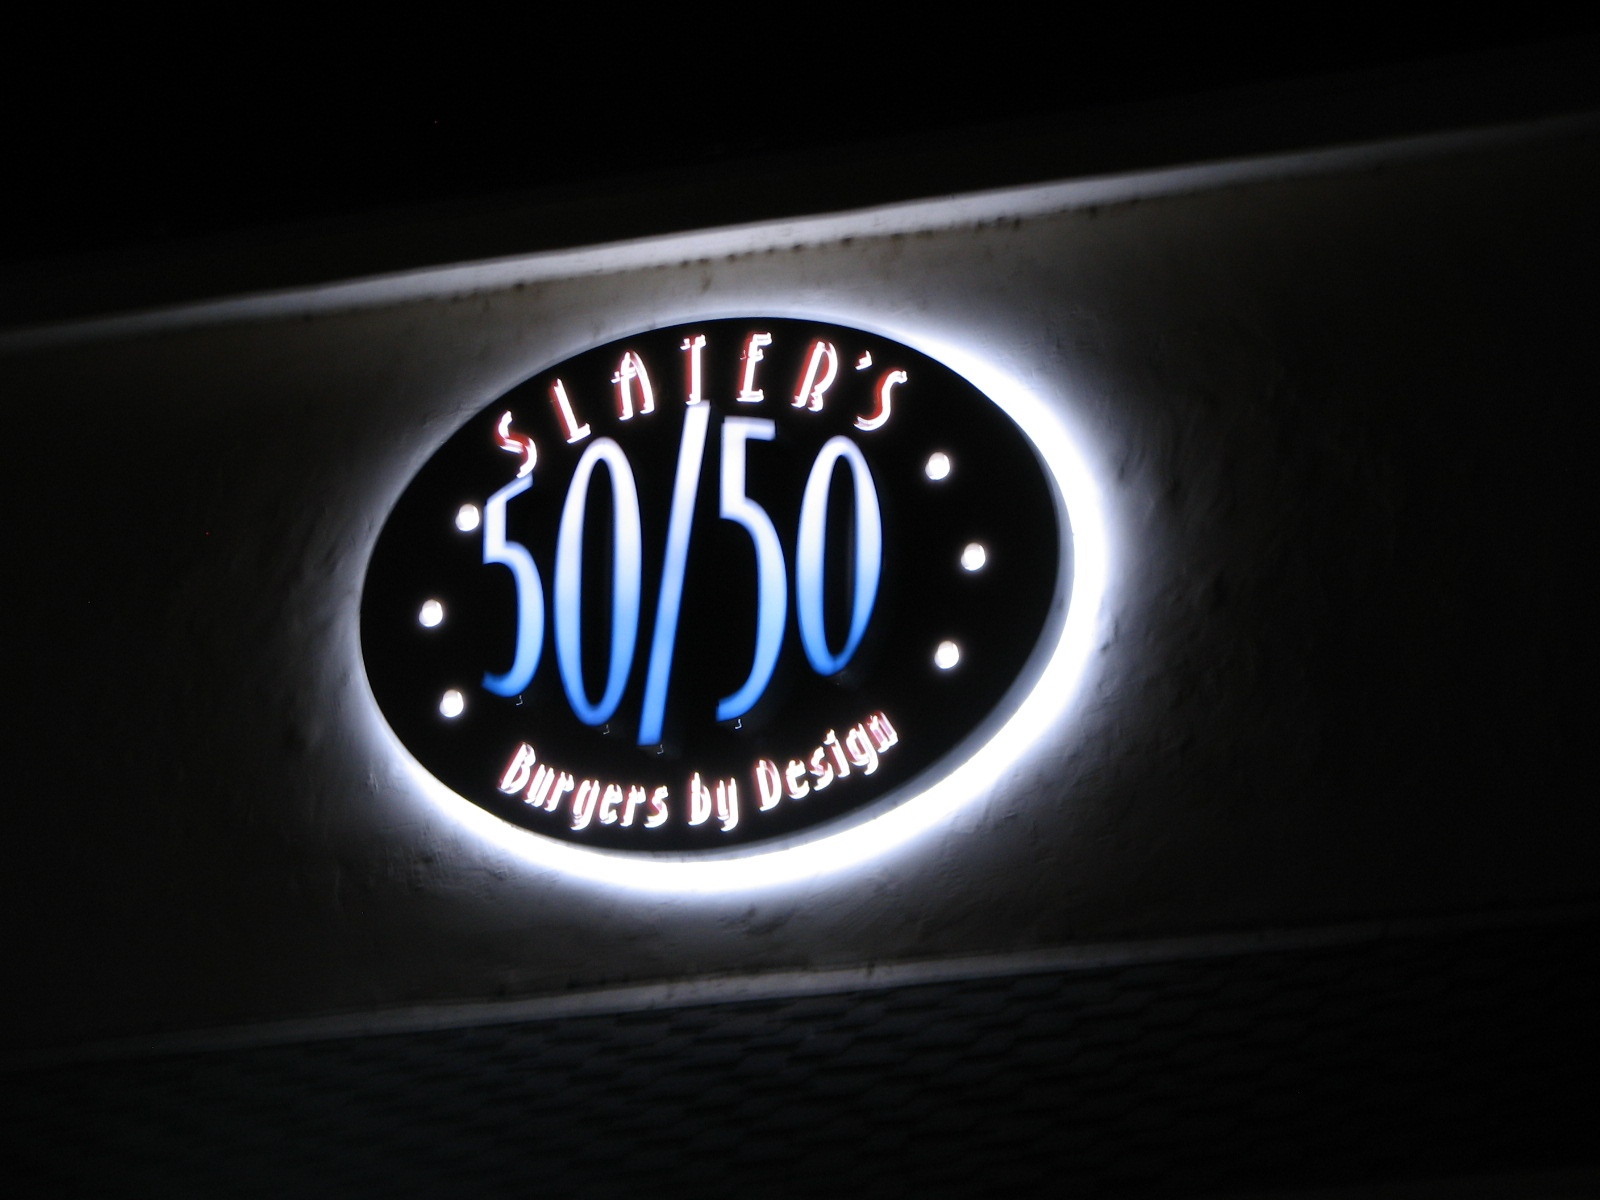 Slaters 50/50 burgers by design